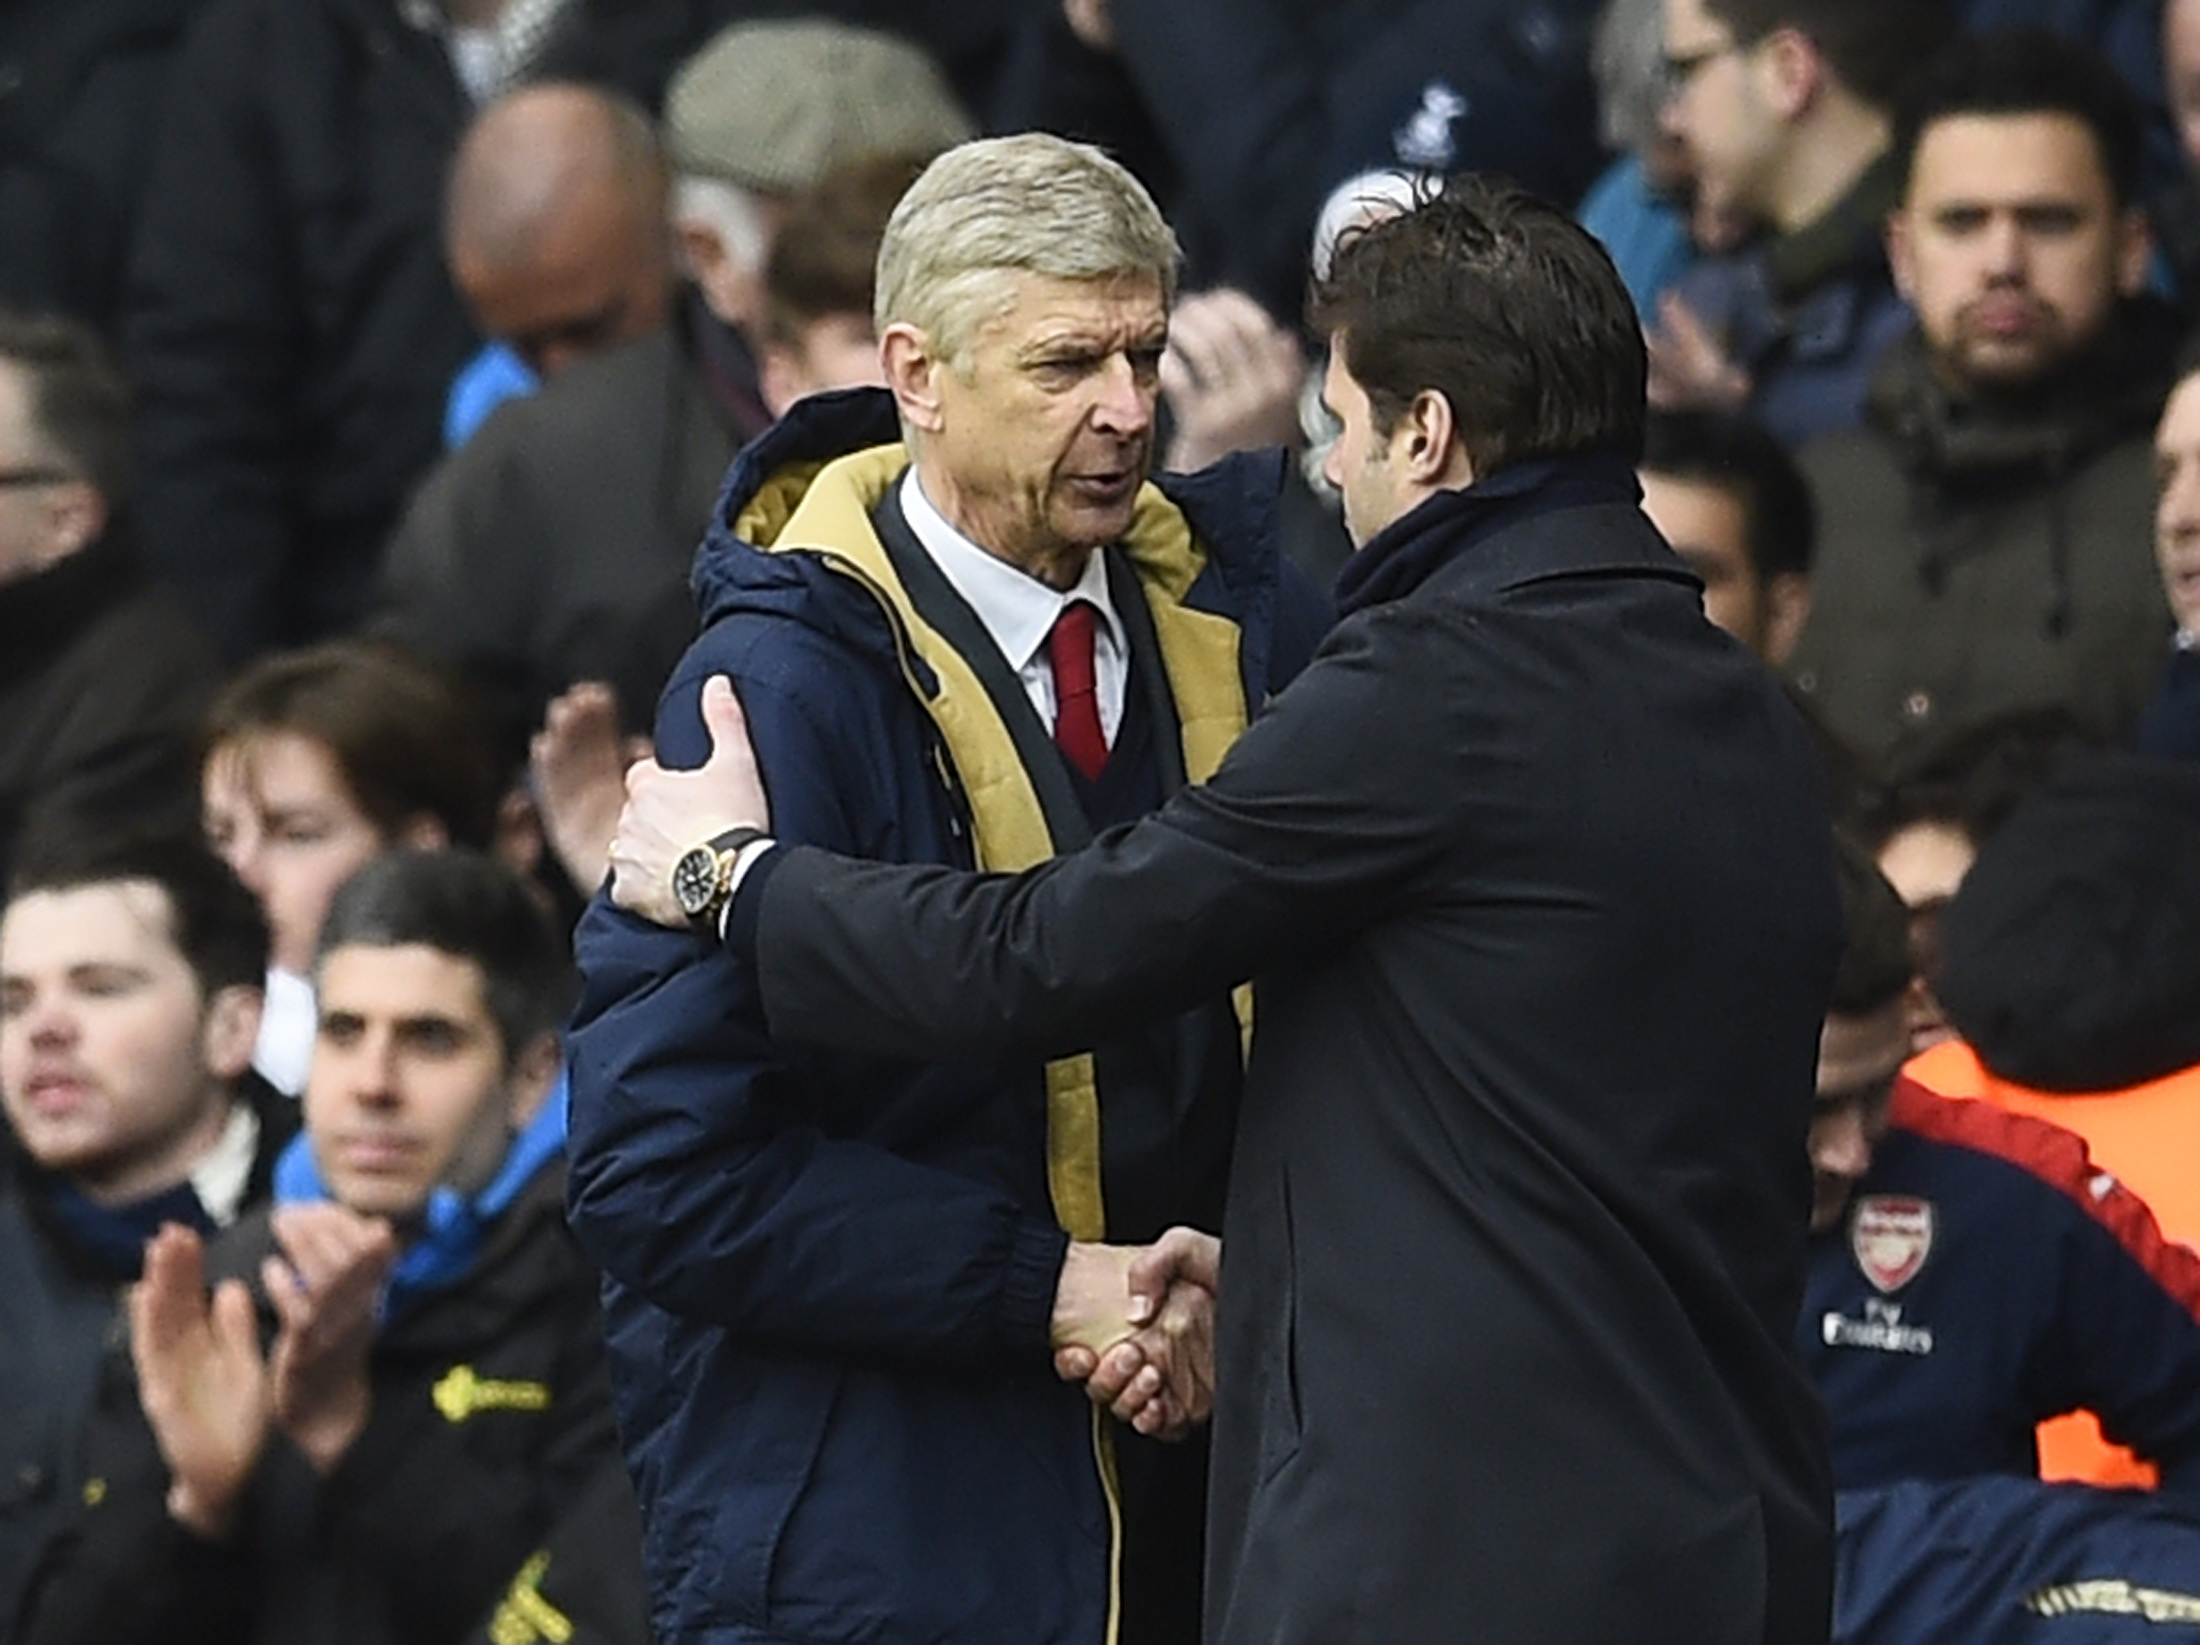 Arsenal will not give up on league title, says Wenger